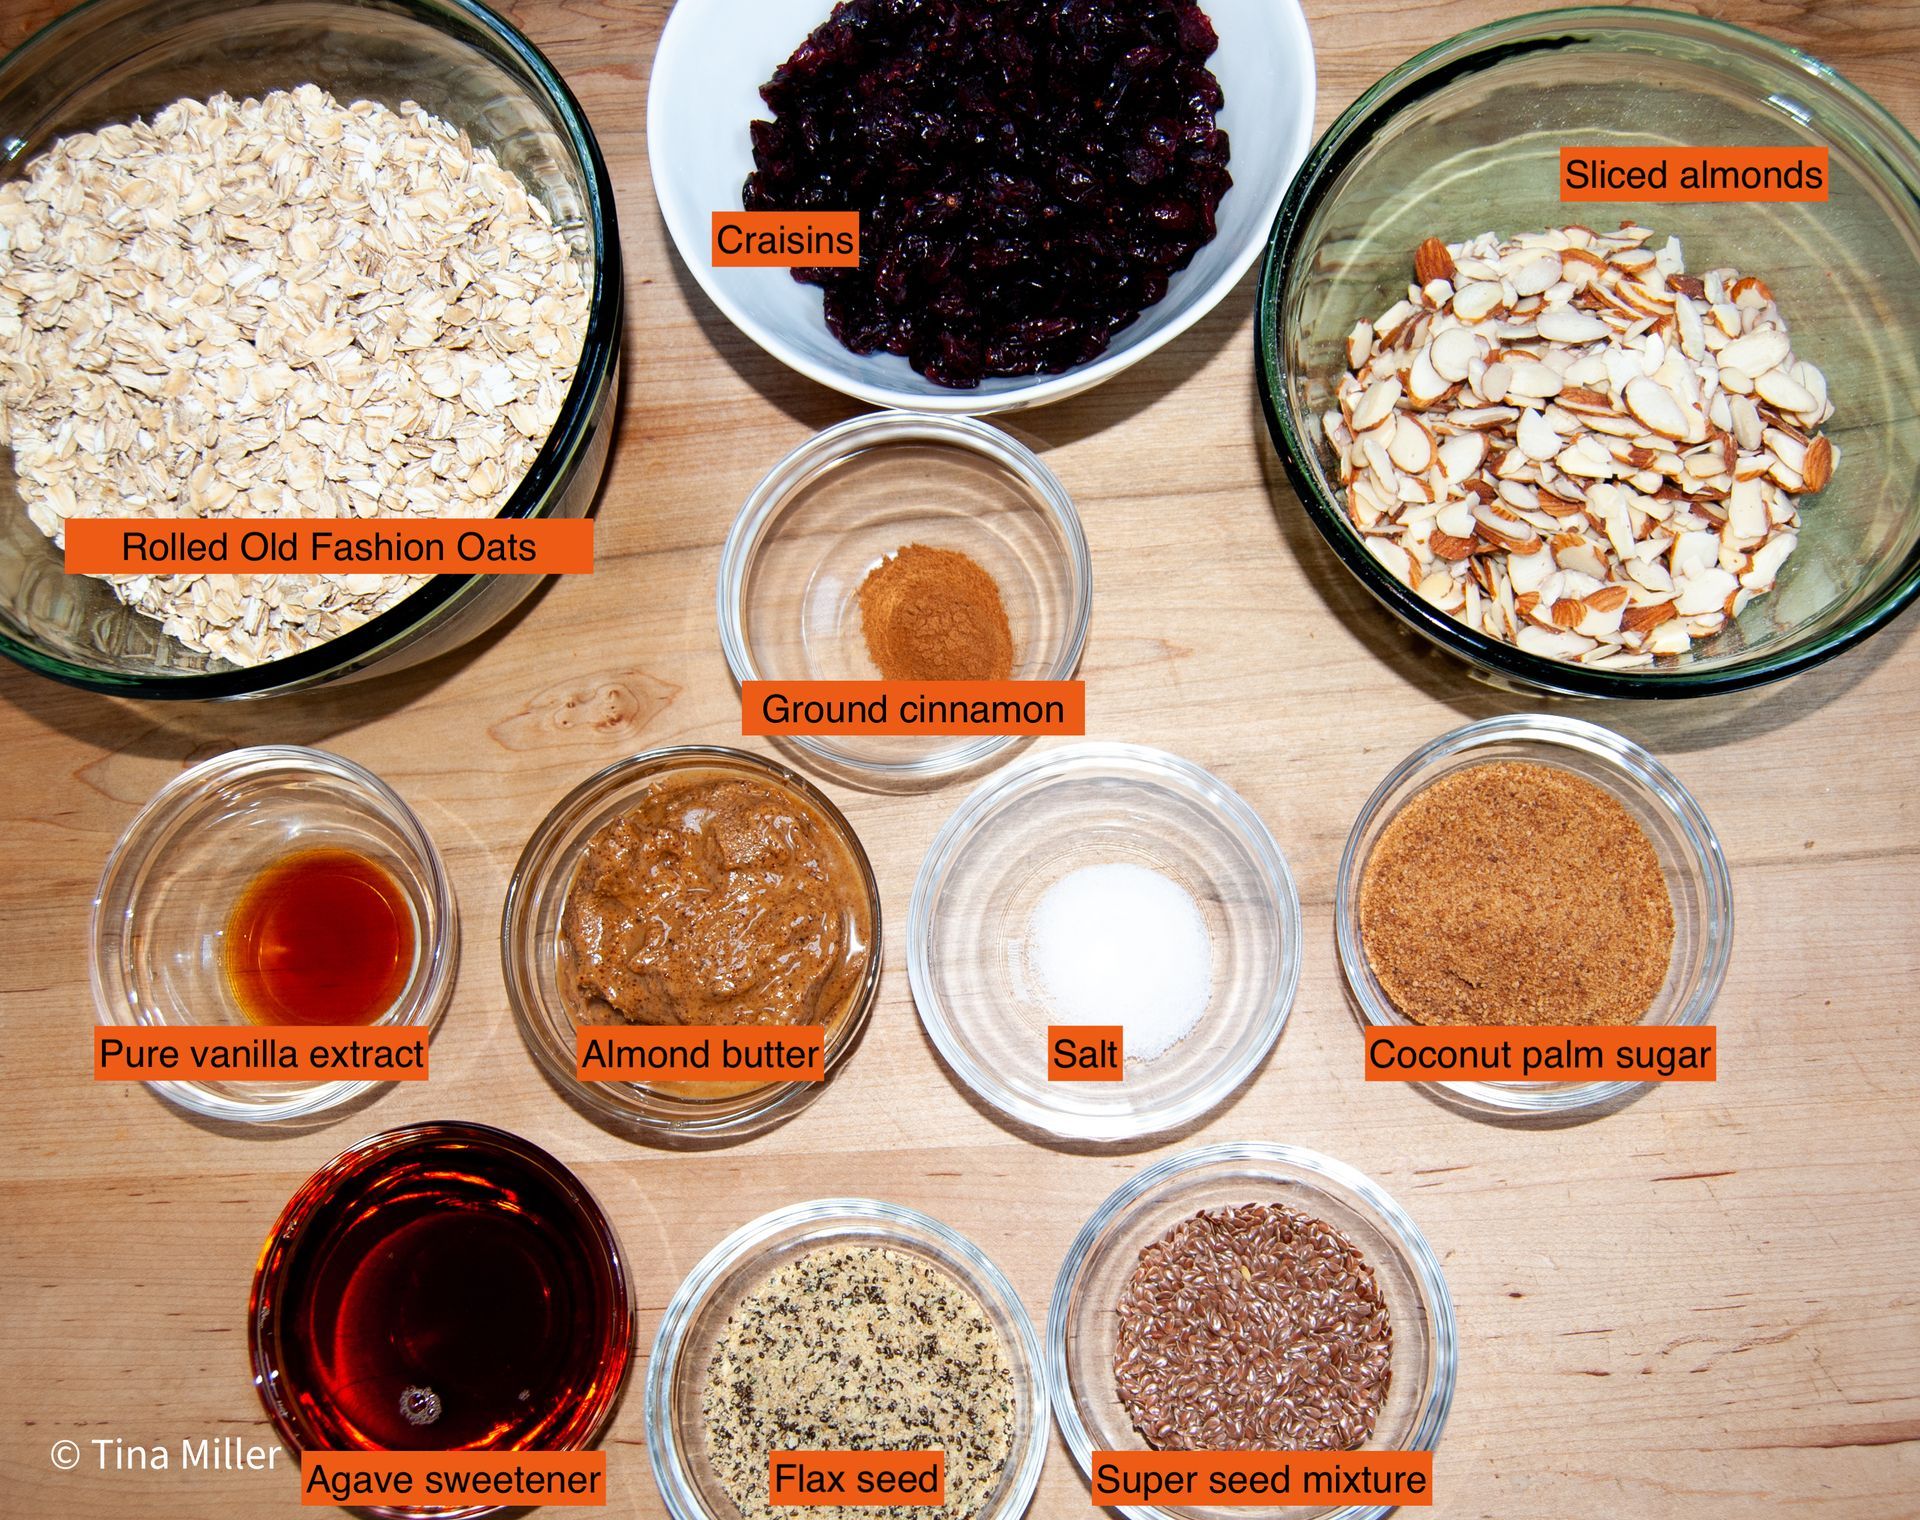 Ingredients of what is in crunchy homemade granola measured out in glass bowls and labled.